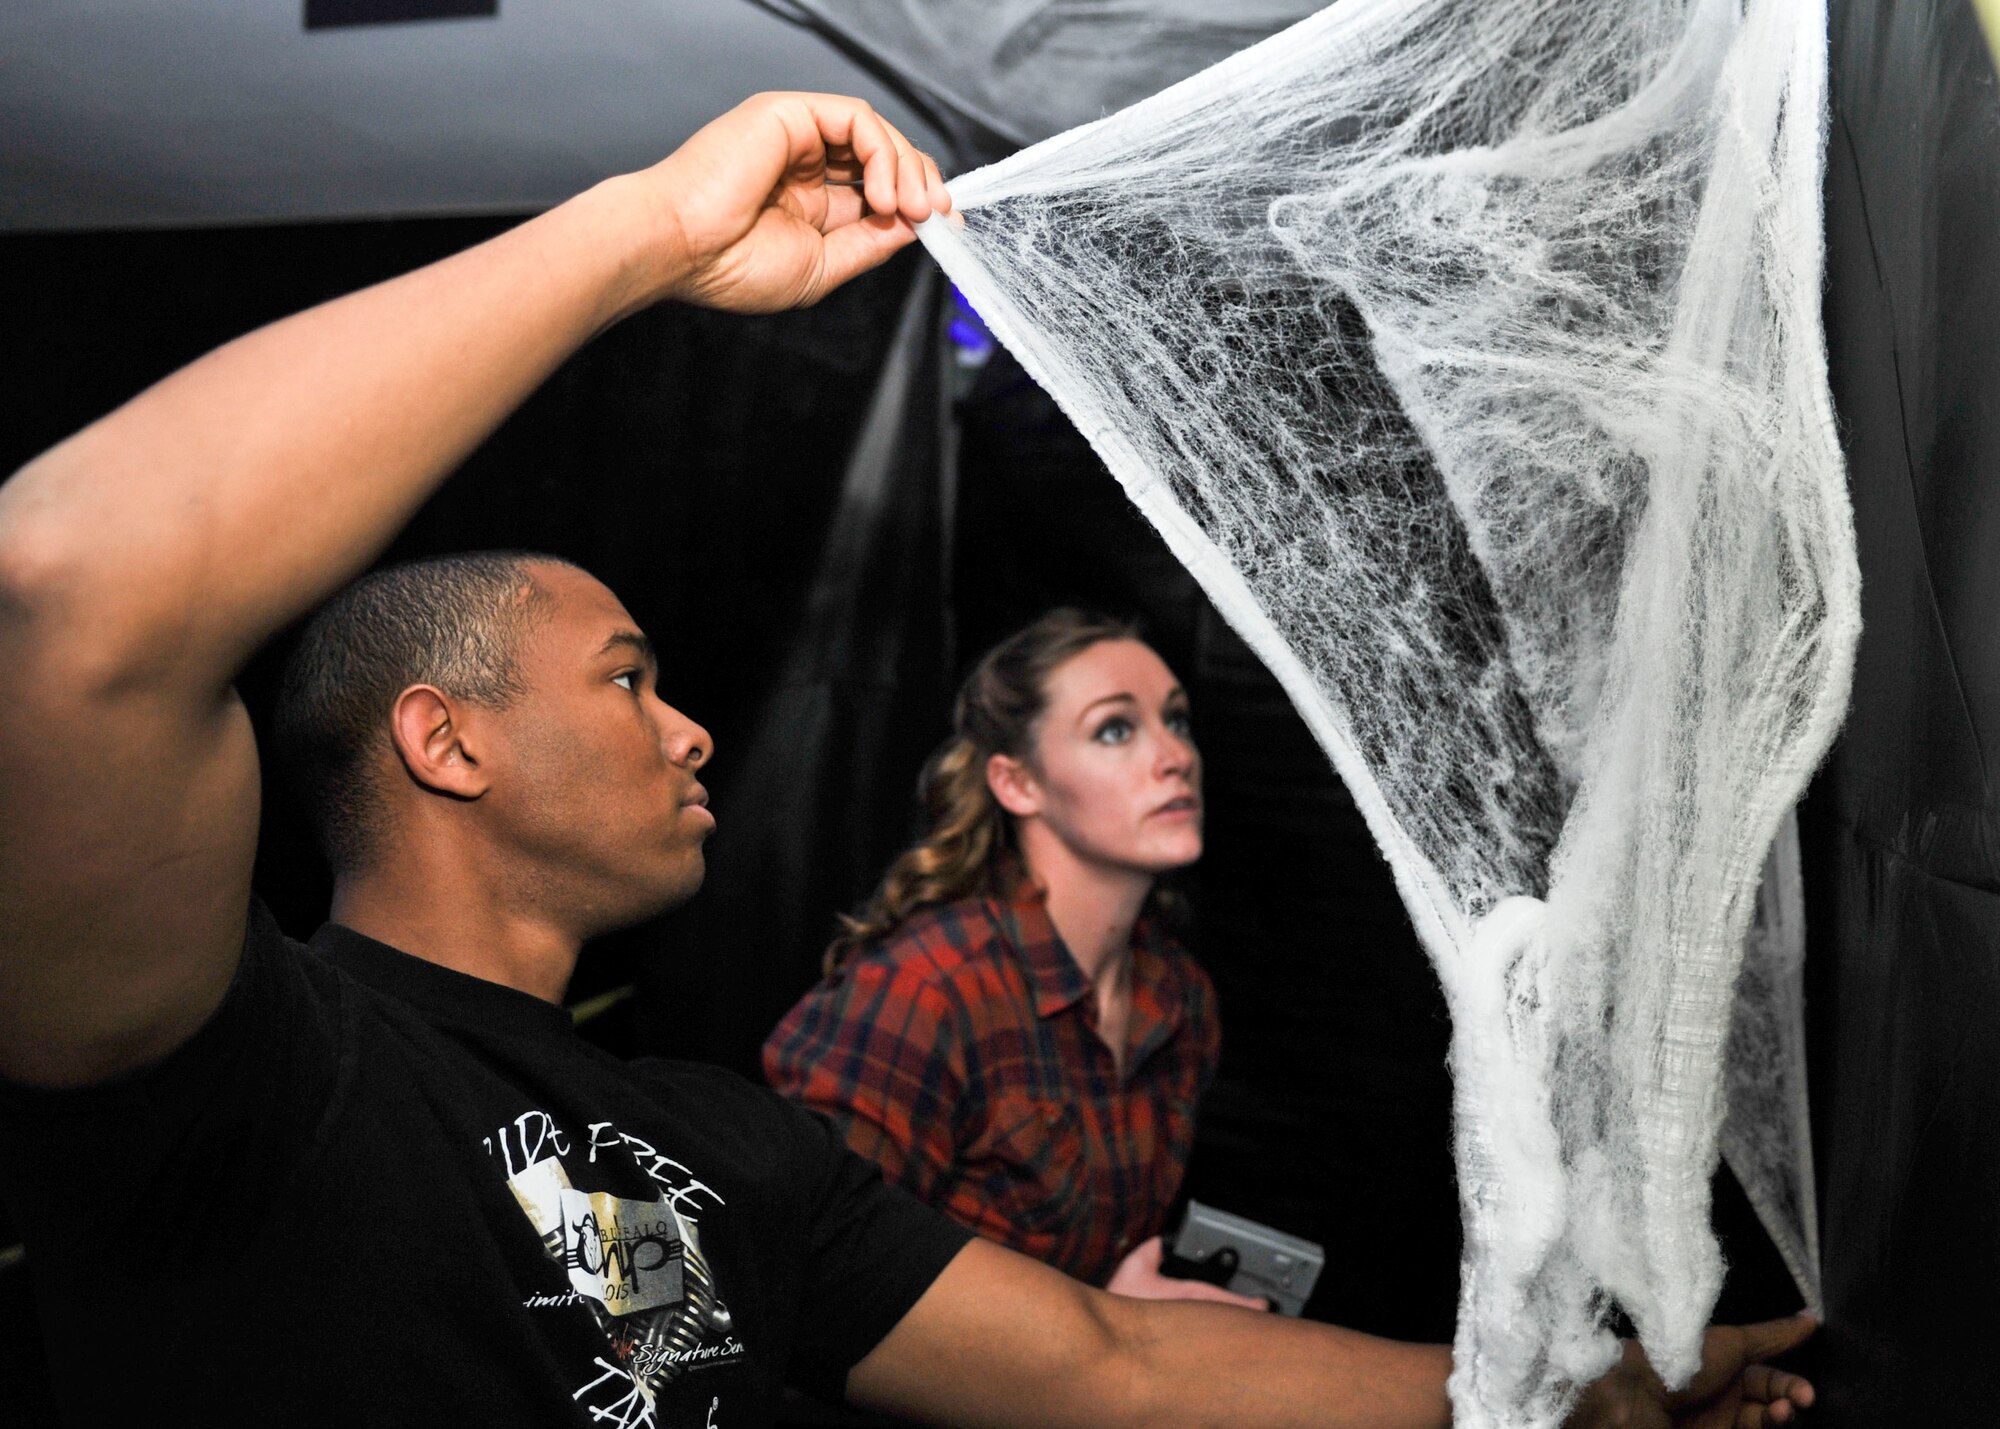 Airman 1st Class Gregory Smith, an avionics technician, and Senior Airman Amber Burns, a non-destructive inspection expert, both assigned to the 28th Maintenance Squadron, hang up decorations for Haunted Camp Lancer on Oct. 27, 2016. Haunted Camp Lancer will be available to all military, dependents and DOD civilians Oct. 28 and 29 from 6-9 p.m. The event is free for all guests, but canned goods or winter clothing donations are encouraged and will be given to the local community. (U.S. Air Force photo by Airman 1st Class Randahl J. Jenson) 